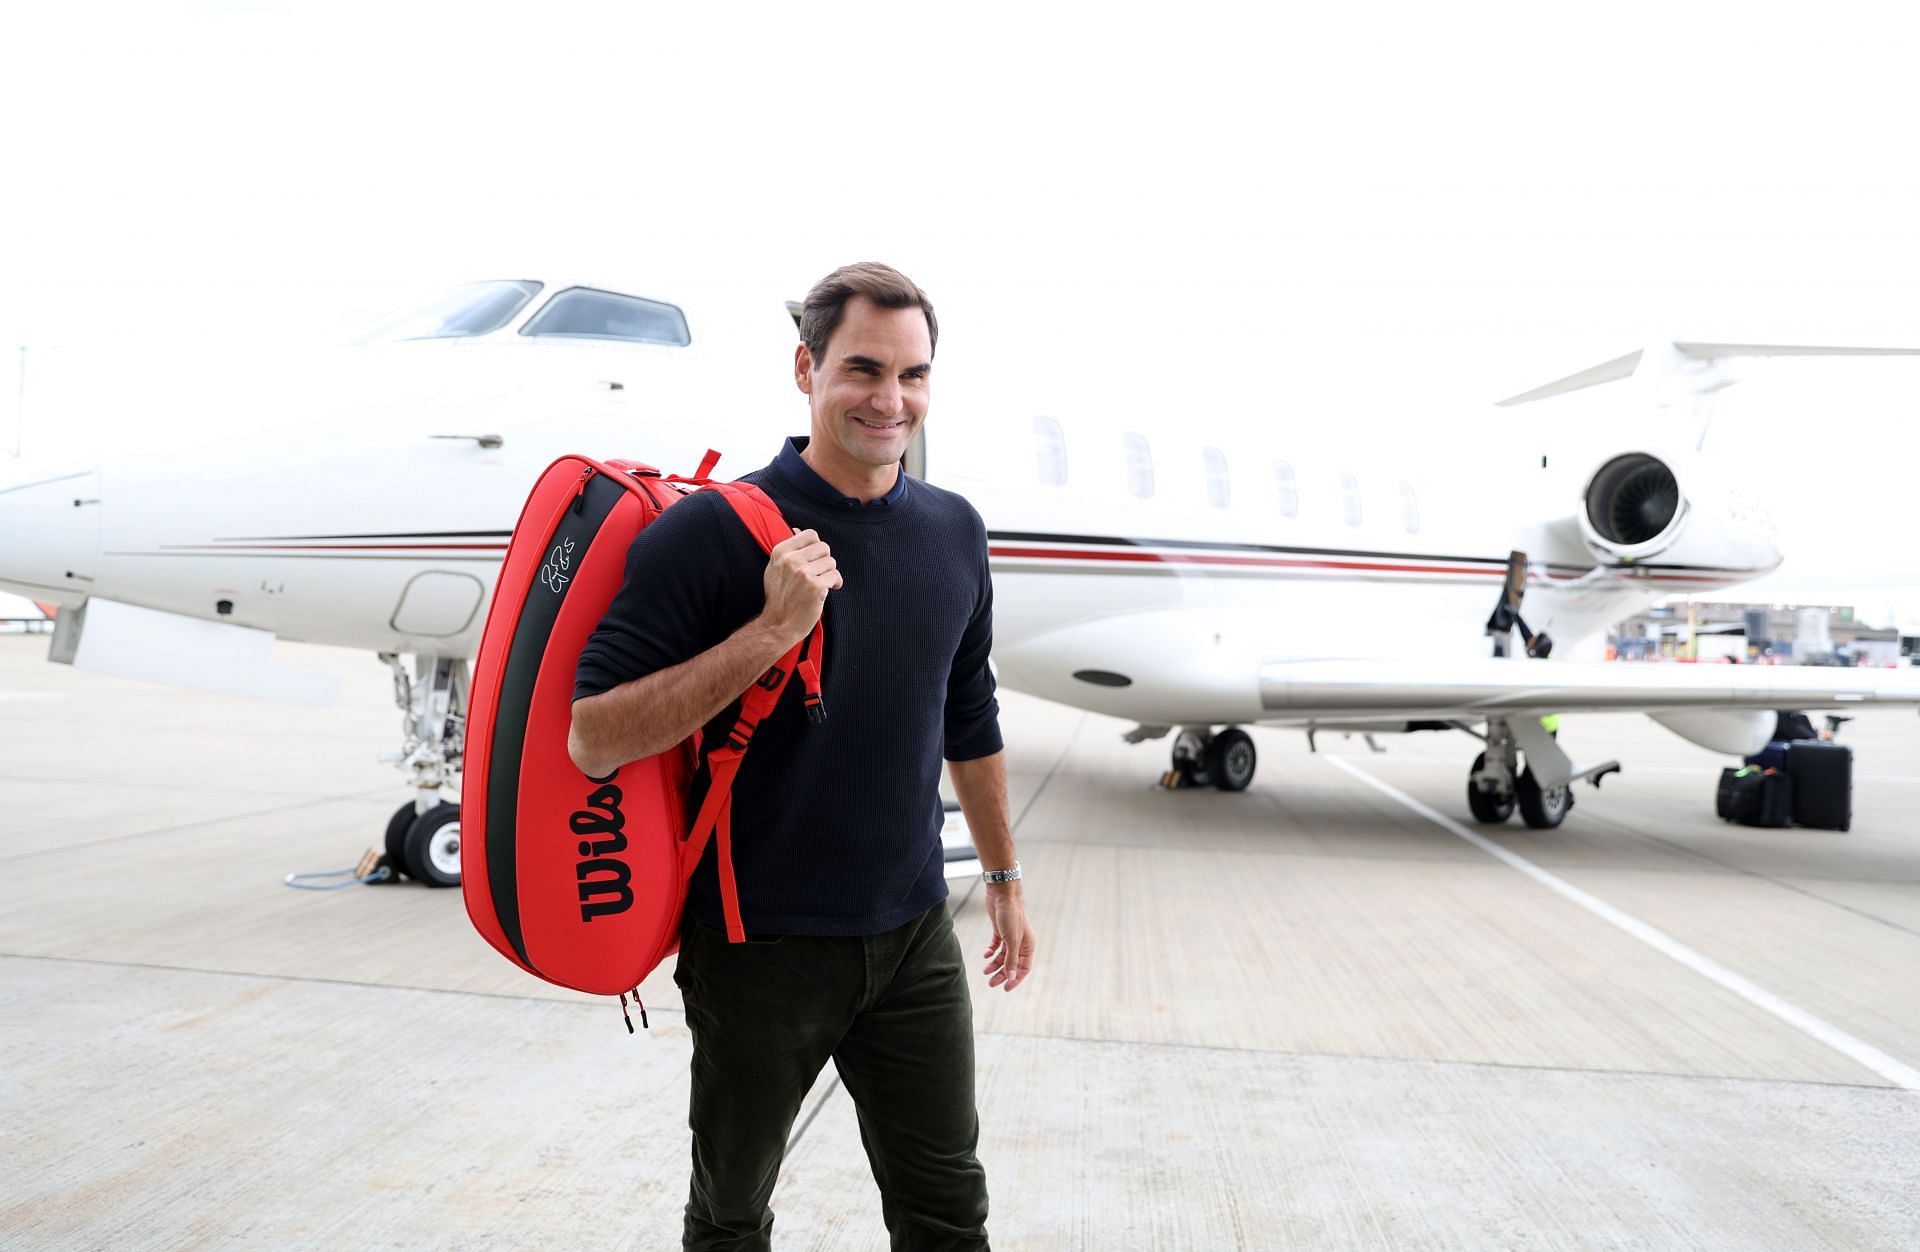 Roger Federer arrives ahead of the Laver Cup to be held at The O2 in London